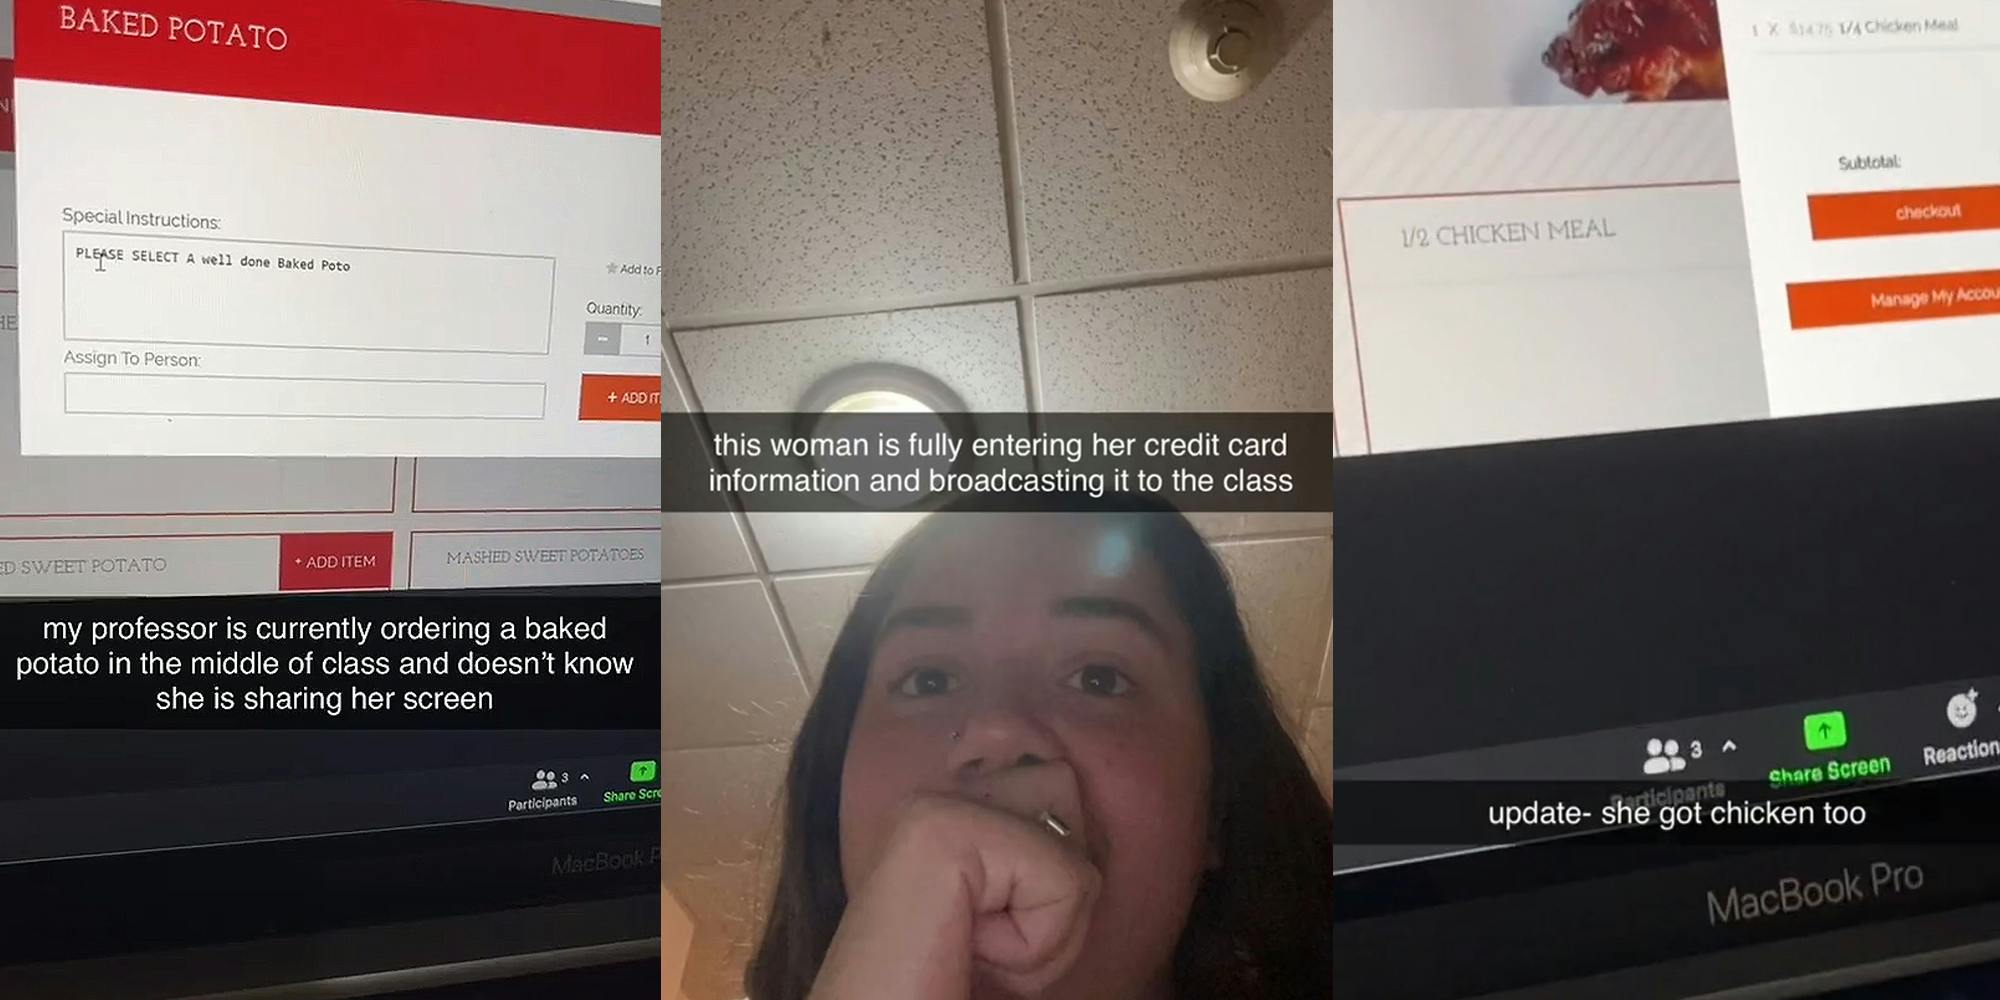 ‘This woman is fully entering her credit card information’: Professor orders baked potato on Zoom while unknowingly sharing screen